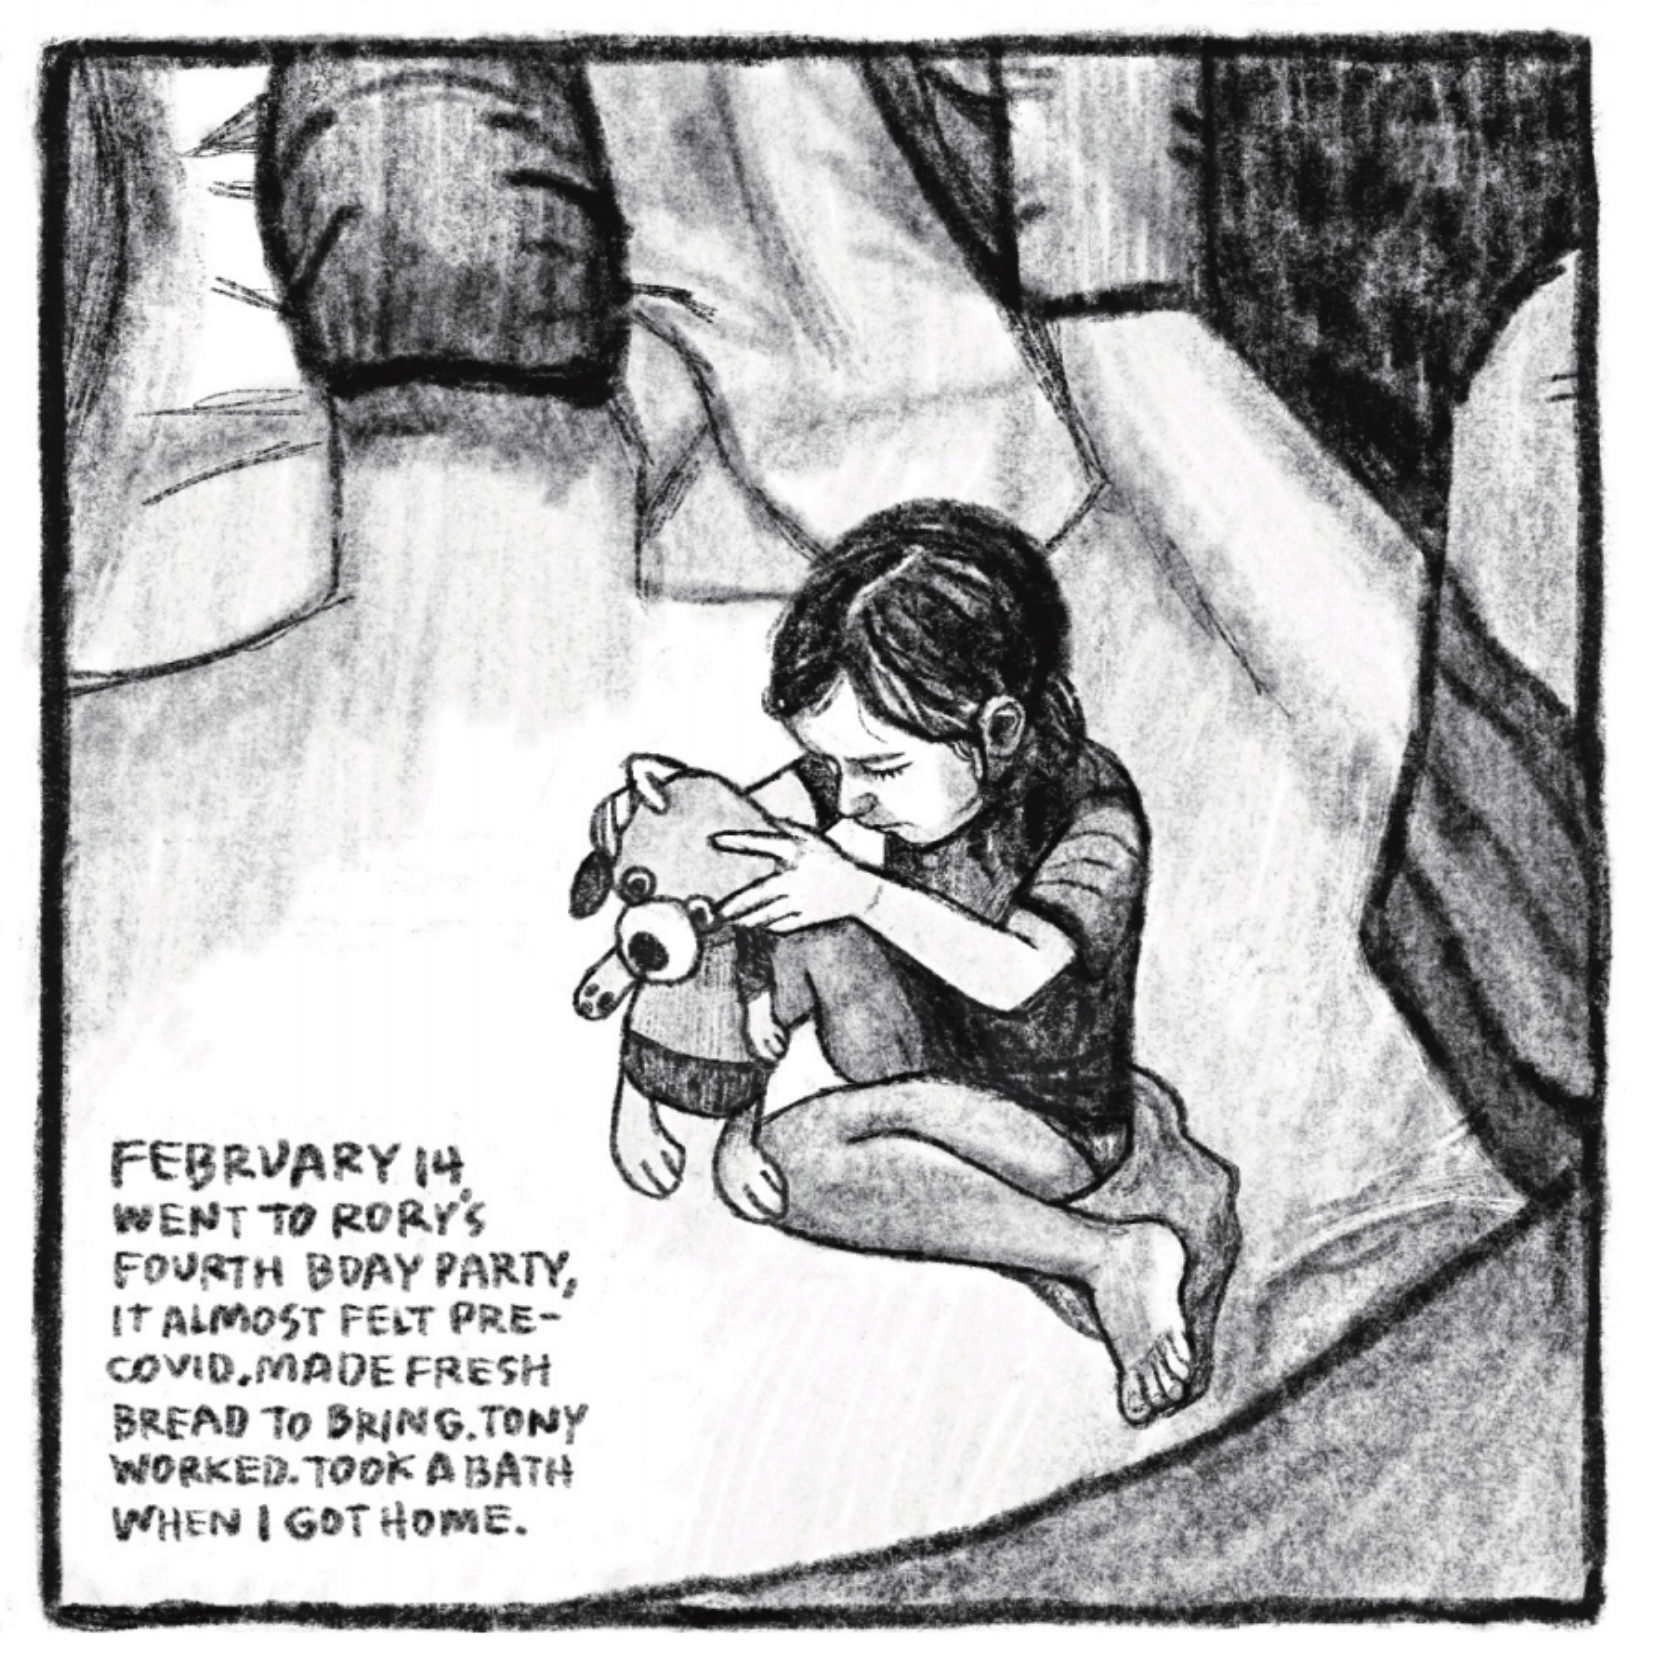 Hold Still Episode 8, Panel 4
"FEBRUARY 14. WENT TO RORY'S FOURTH BDAY PARTY, IT ALMOST FELT PRE-COVID. MADE FRESH BREAD TO BRING. TONY WORKED. TOOK A BATH WHEN I GOT HOME."
Drawing of a young girl sitting and looking down, holding a stuffed animal.